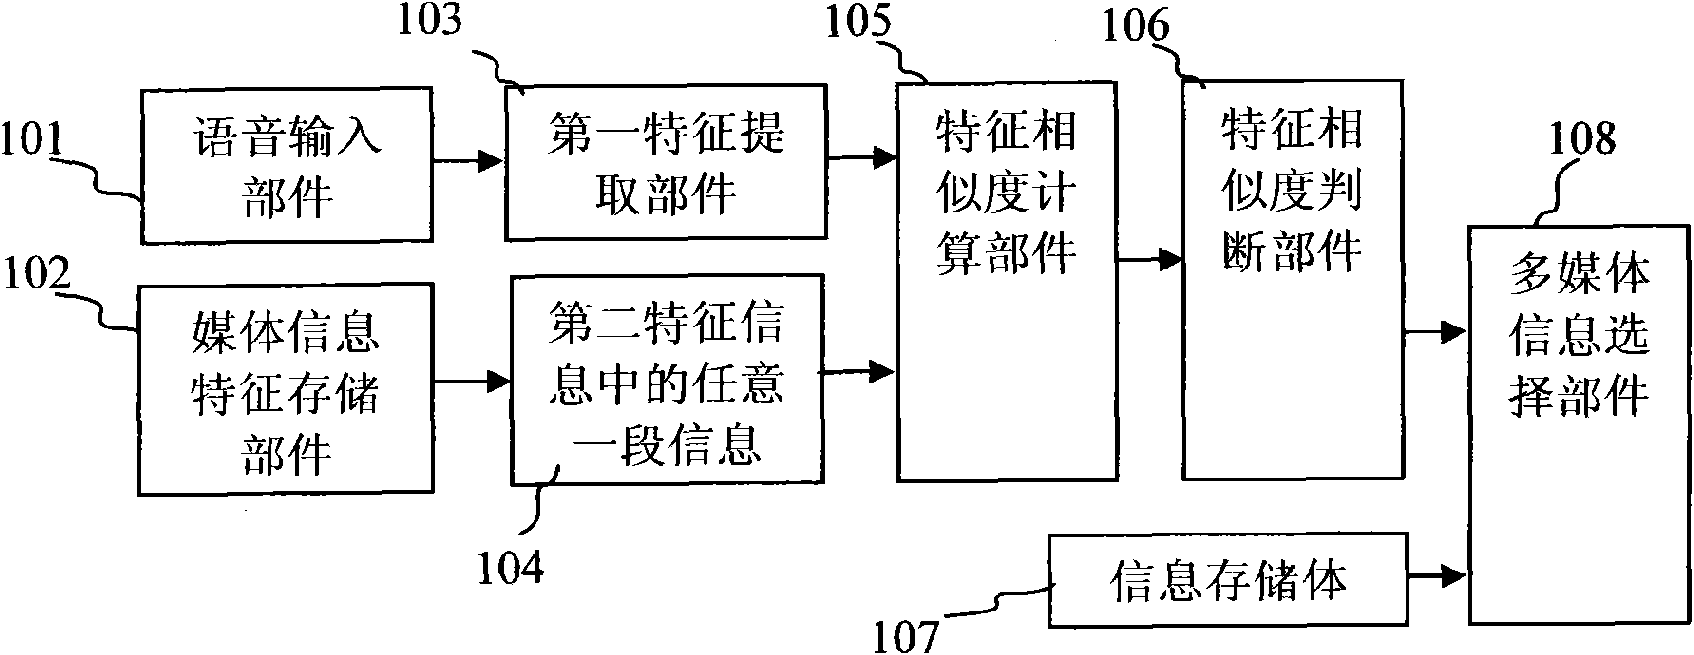 Media broadcasting device and media operating method